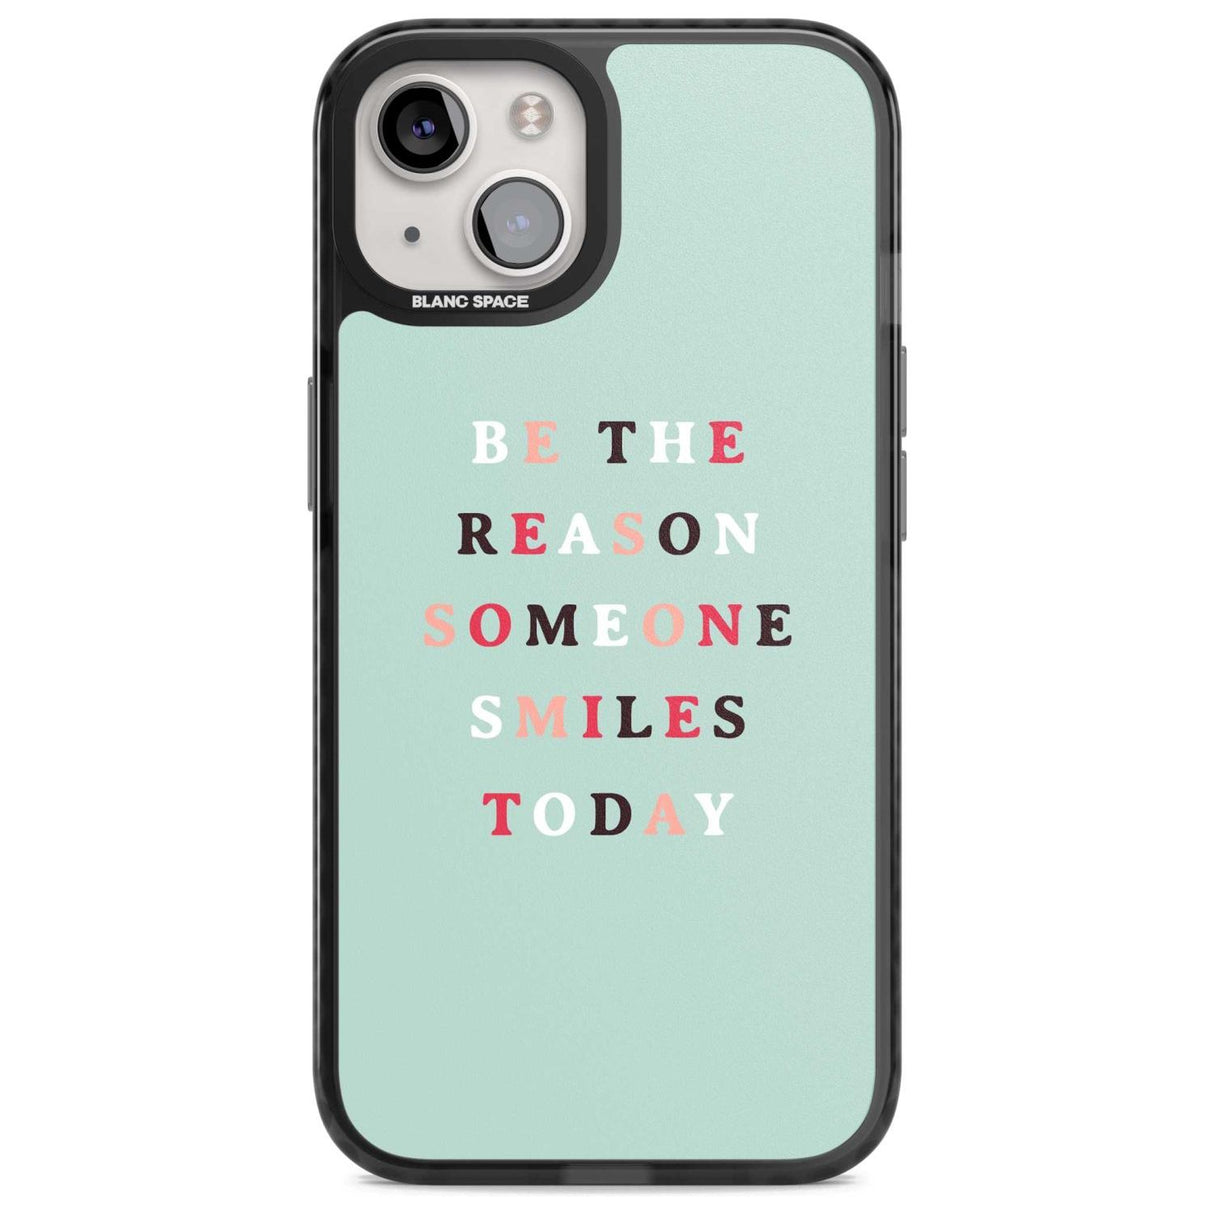 Be the reason someone smiles Phone Case iPhone 15 Plus / Magsafe Black Impact Case,iPhone 15 / Magsafe Black Impact Case,iPhone 14 Plus / Magsafe Black Impact Case,iPhone 14 / Magsafe Black Impact Case,iPhone 13 / Magsafe Black Impact Case Blanc Space